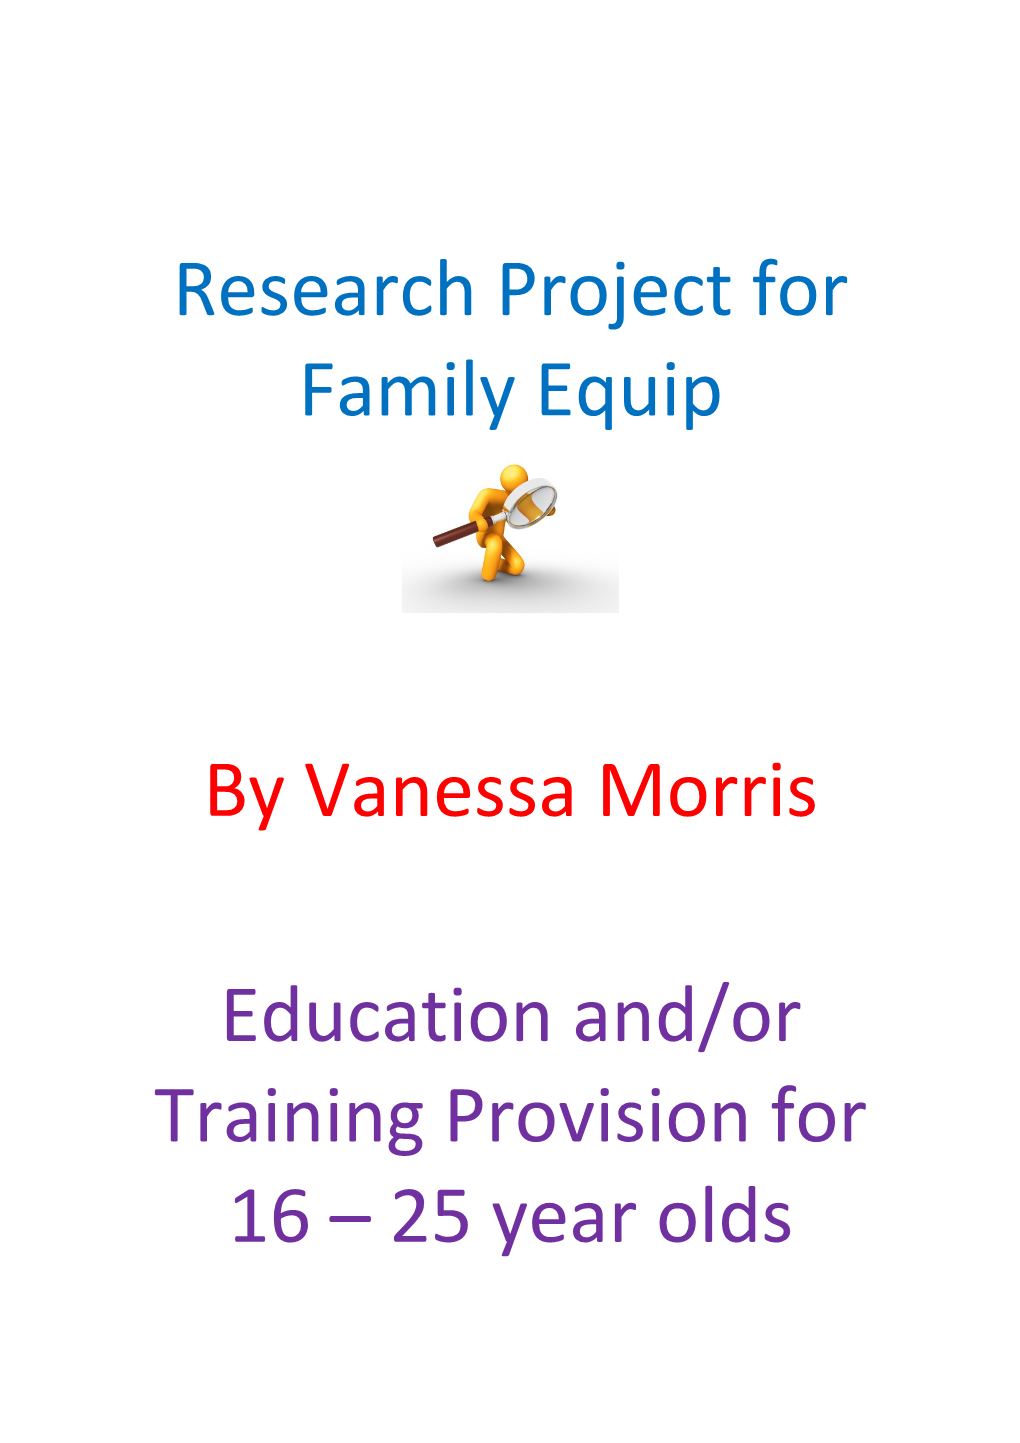 Research Project for Family Equip